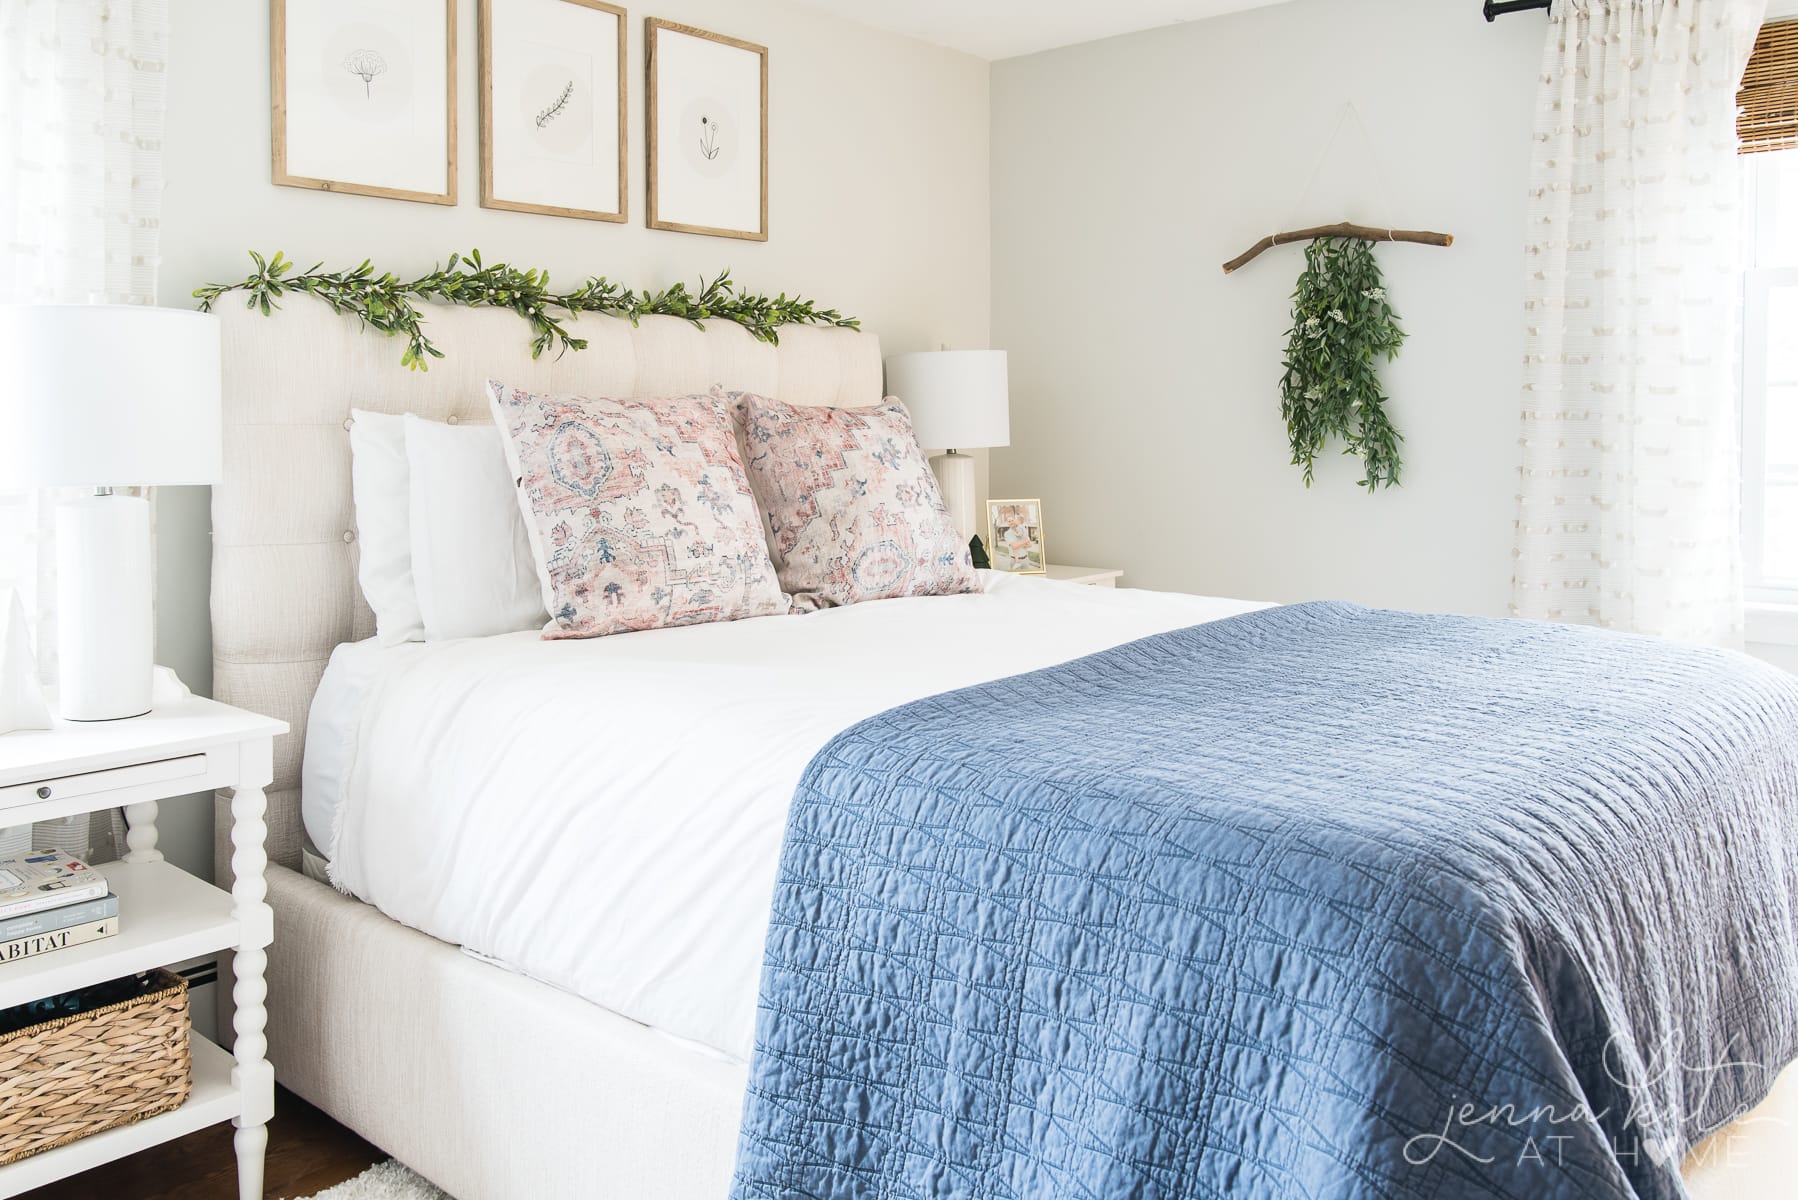 Bedroom decorated for Christmas with blue duvet, and some simple greenery